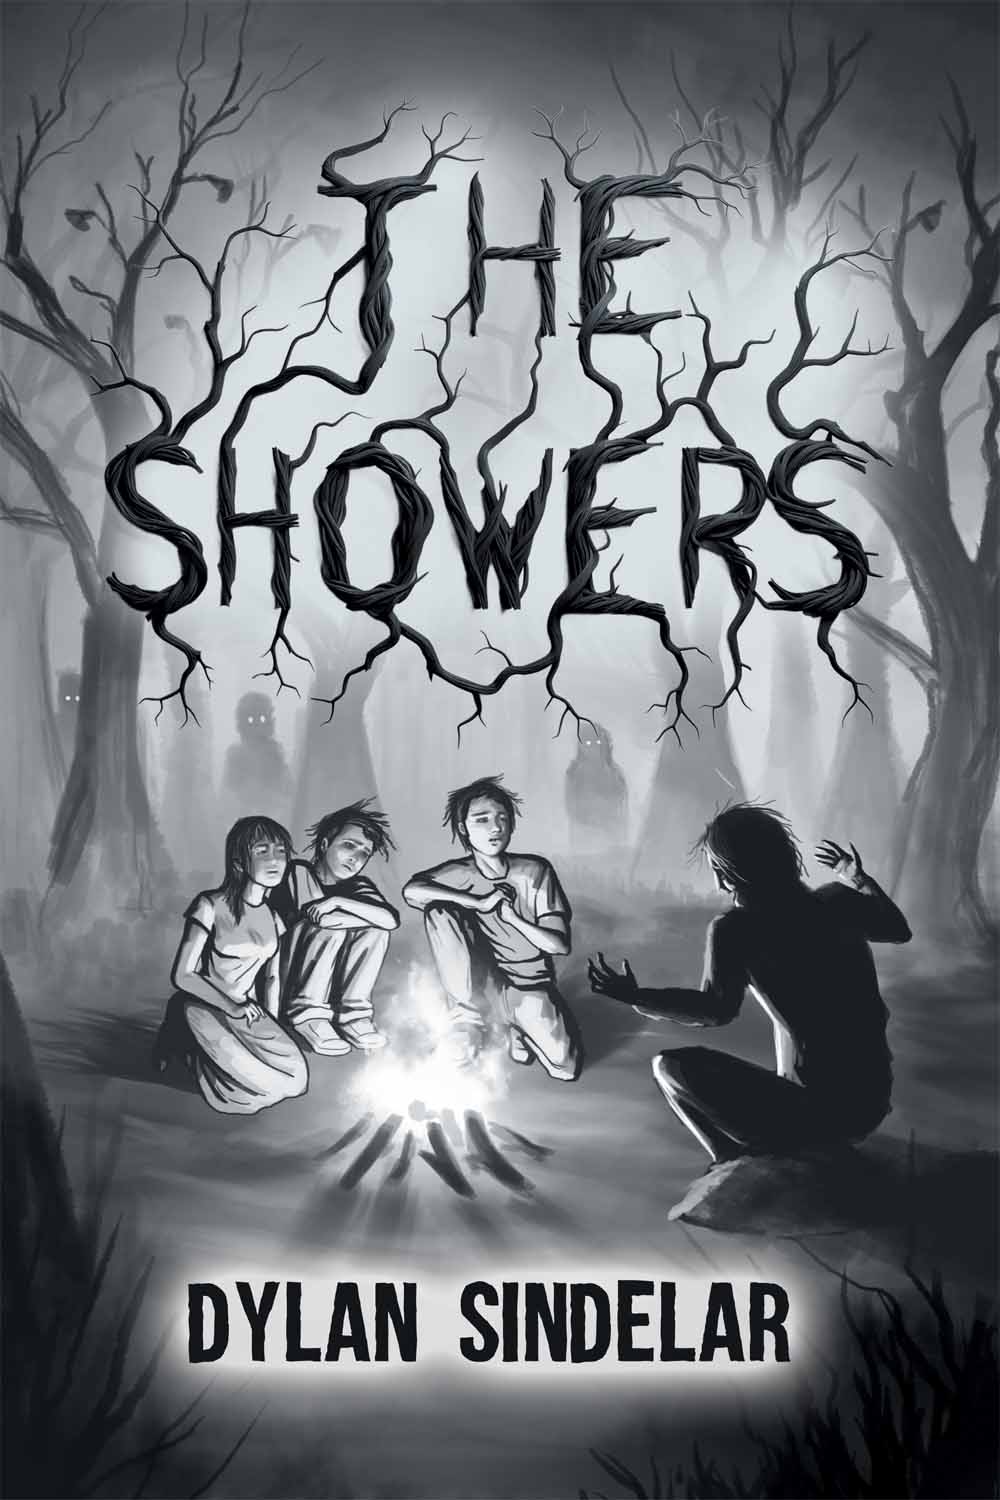 The Showers by Dylan Sindelar